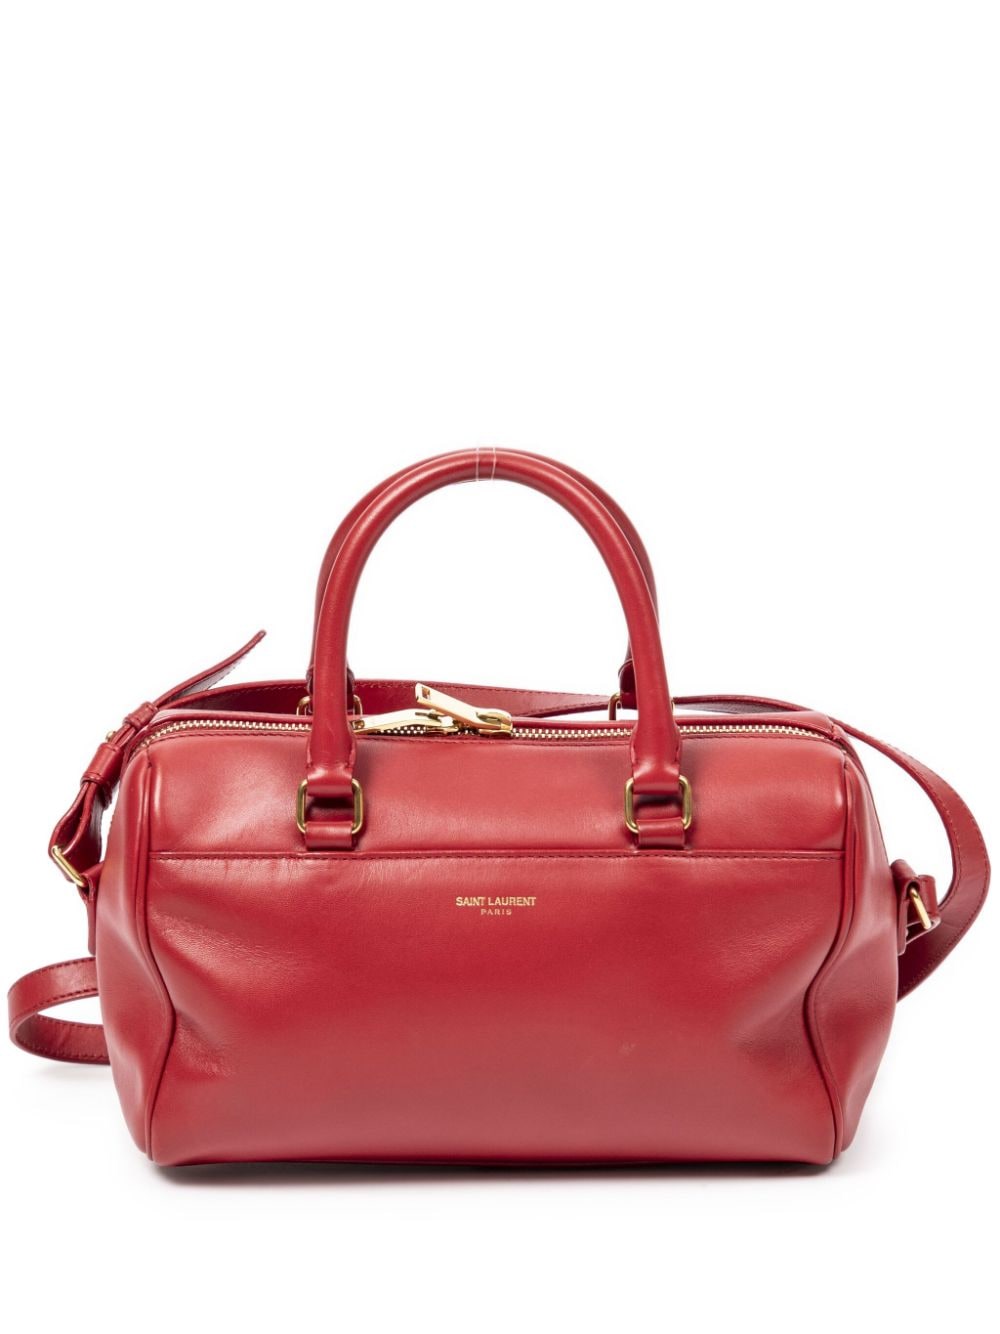 Saint Laurent Pre-Owned Baby leather duffle bag - Red von Saint Laurent Pre-Owned